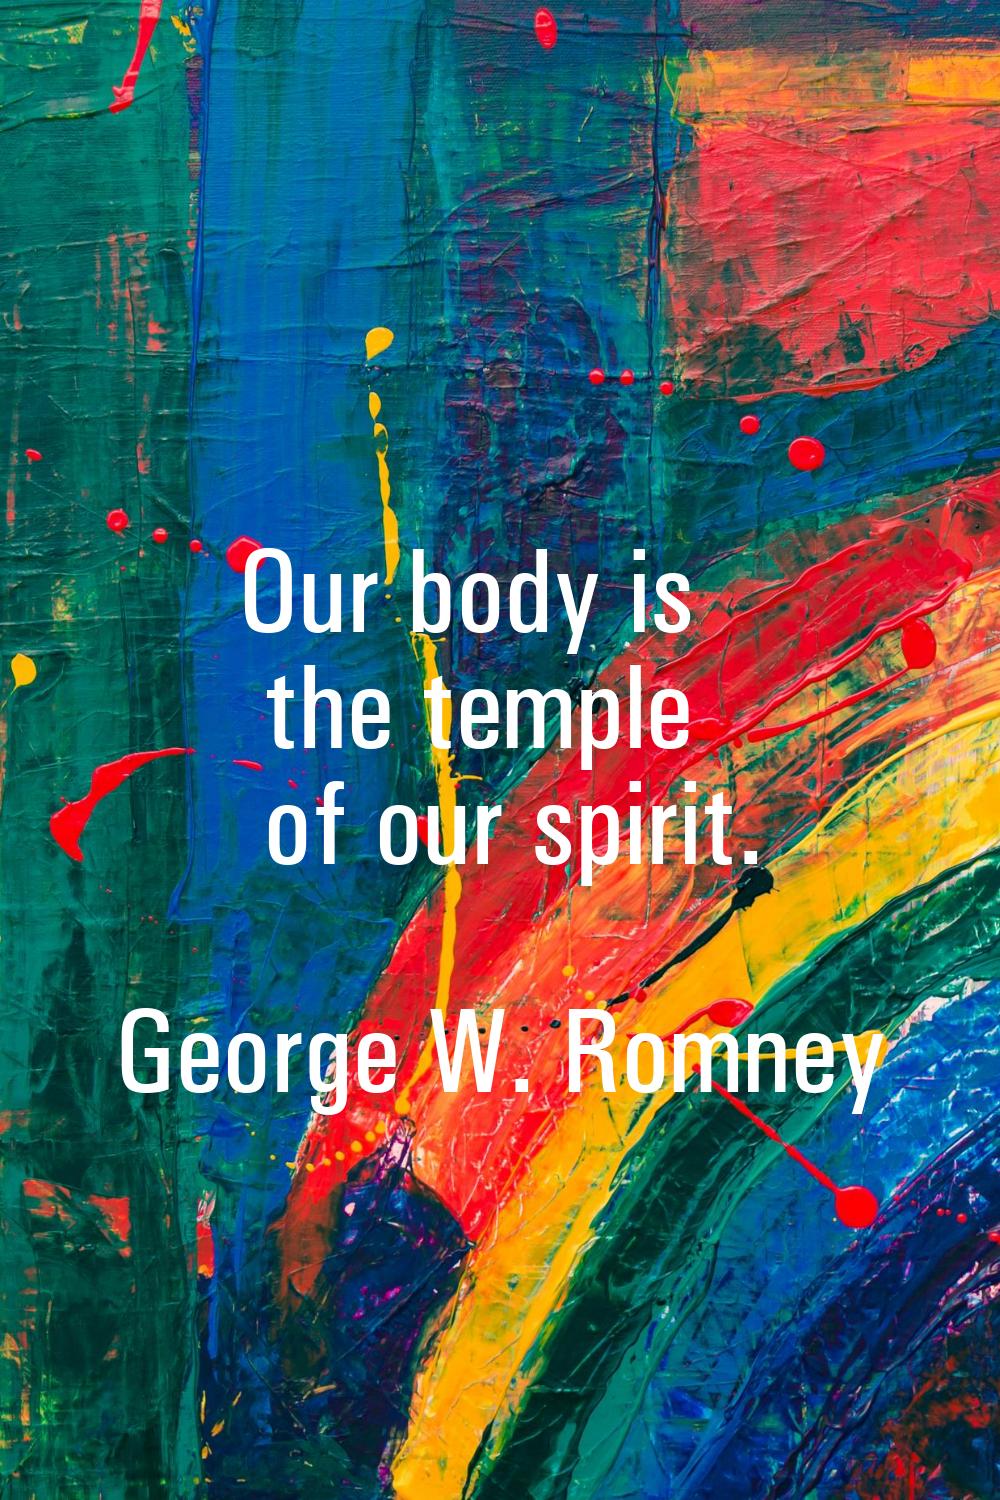 Our body is the temple of our spirit.